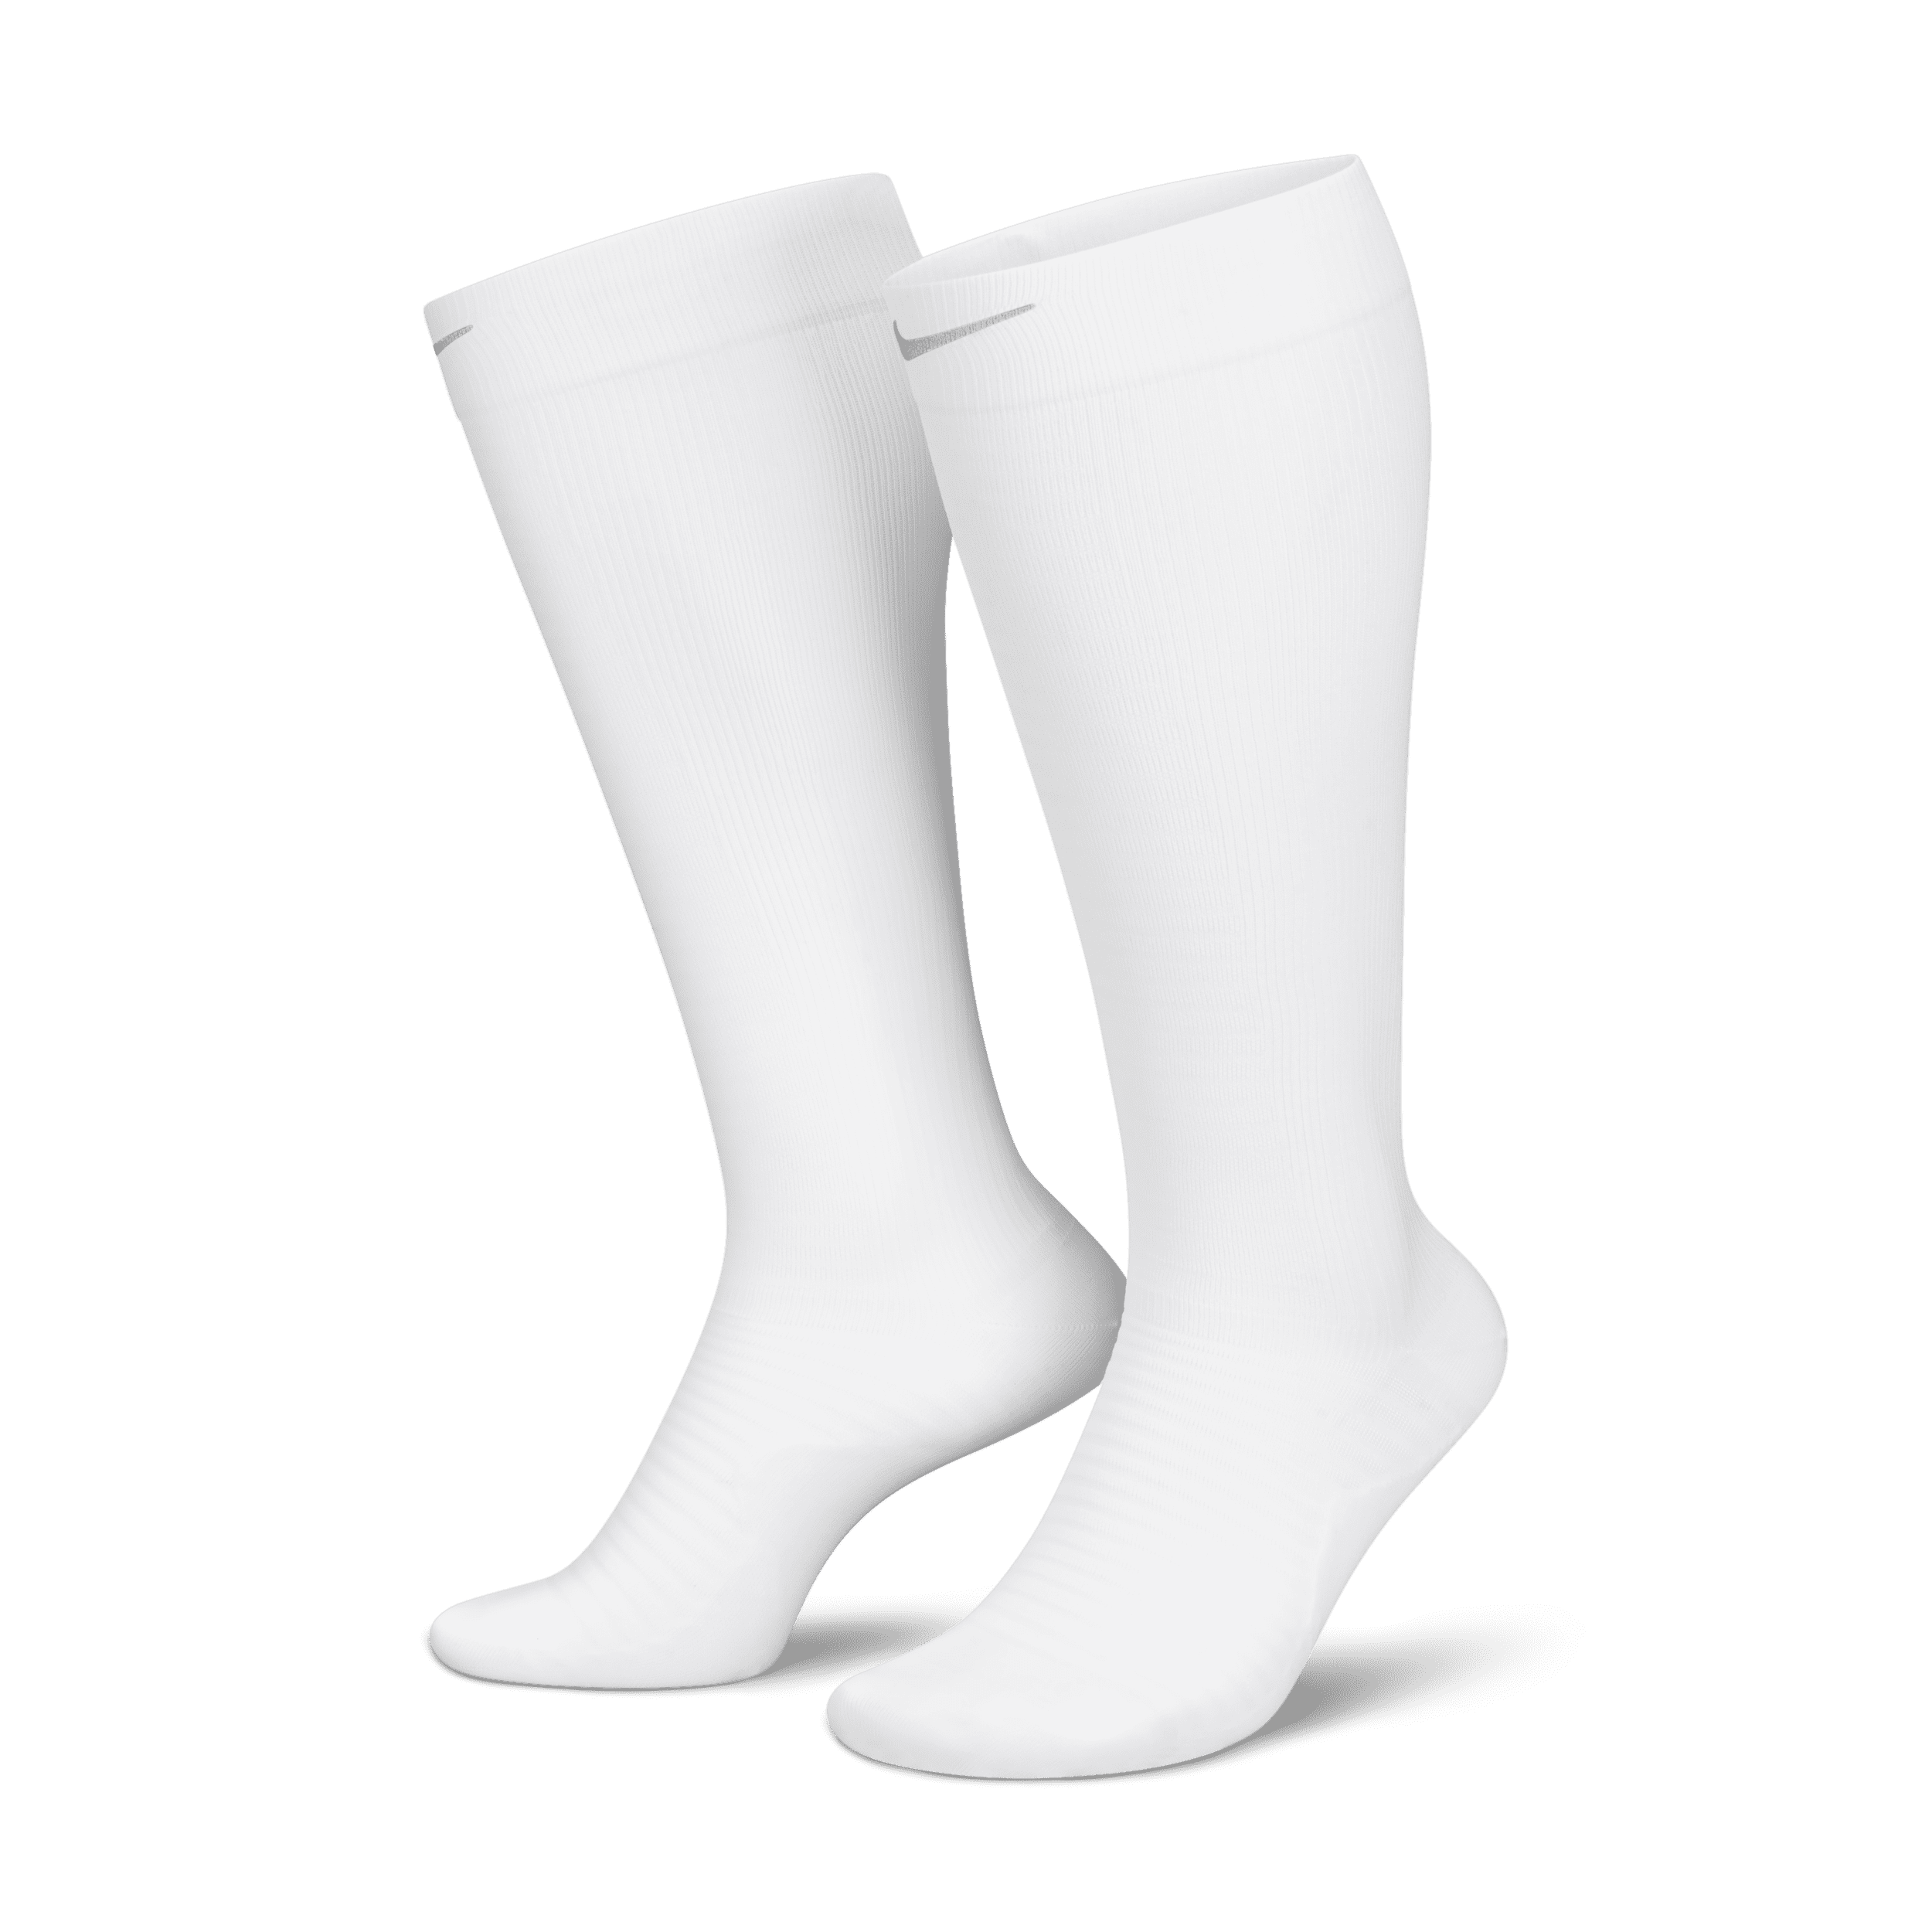 Nike Spark Lightweight Over-The-Calf Compression Calcetines de running - Blanco